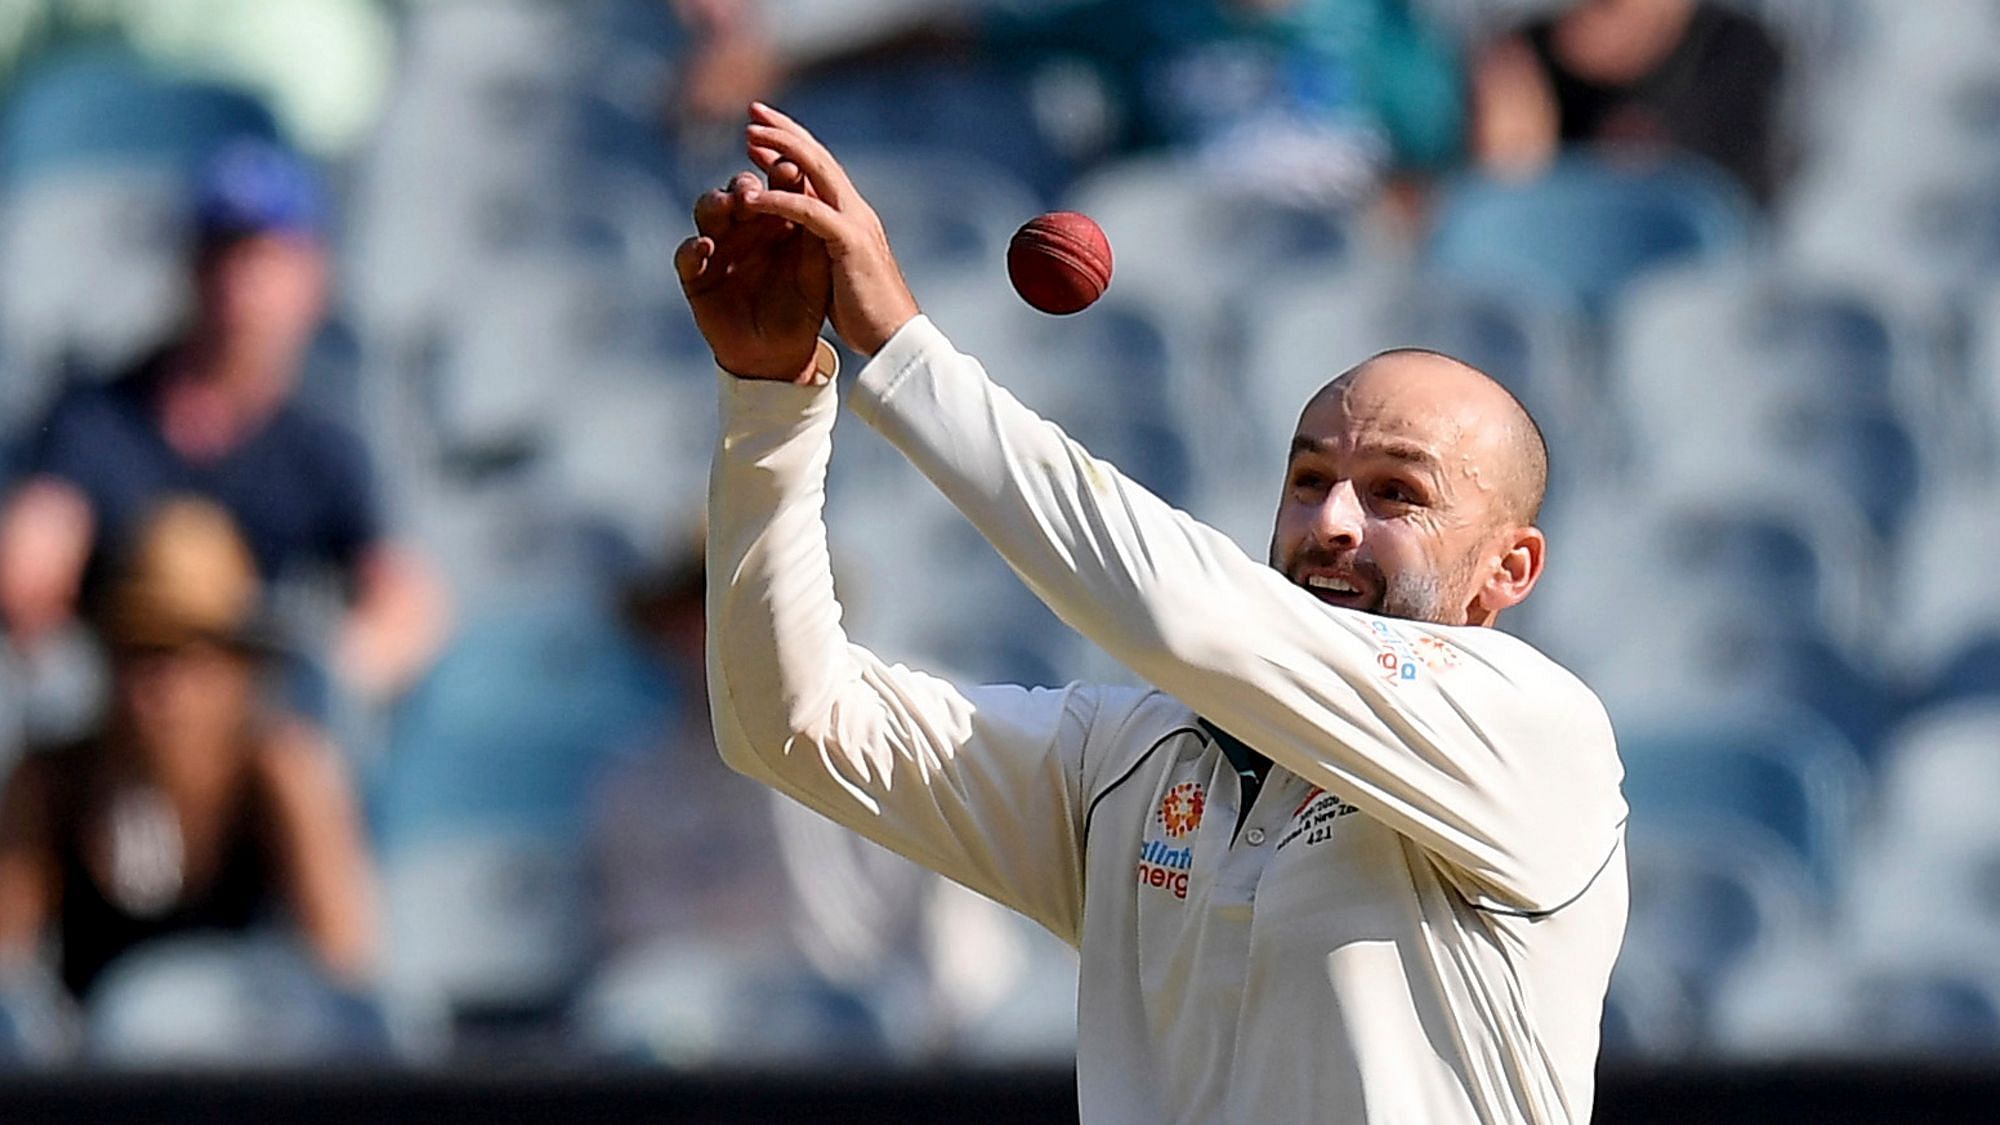 Nathan Lyon is the third-highest wicket taker for Australia in Tests having picked 380 wickets in 95 matches.